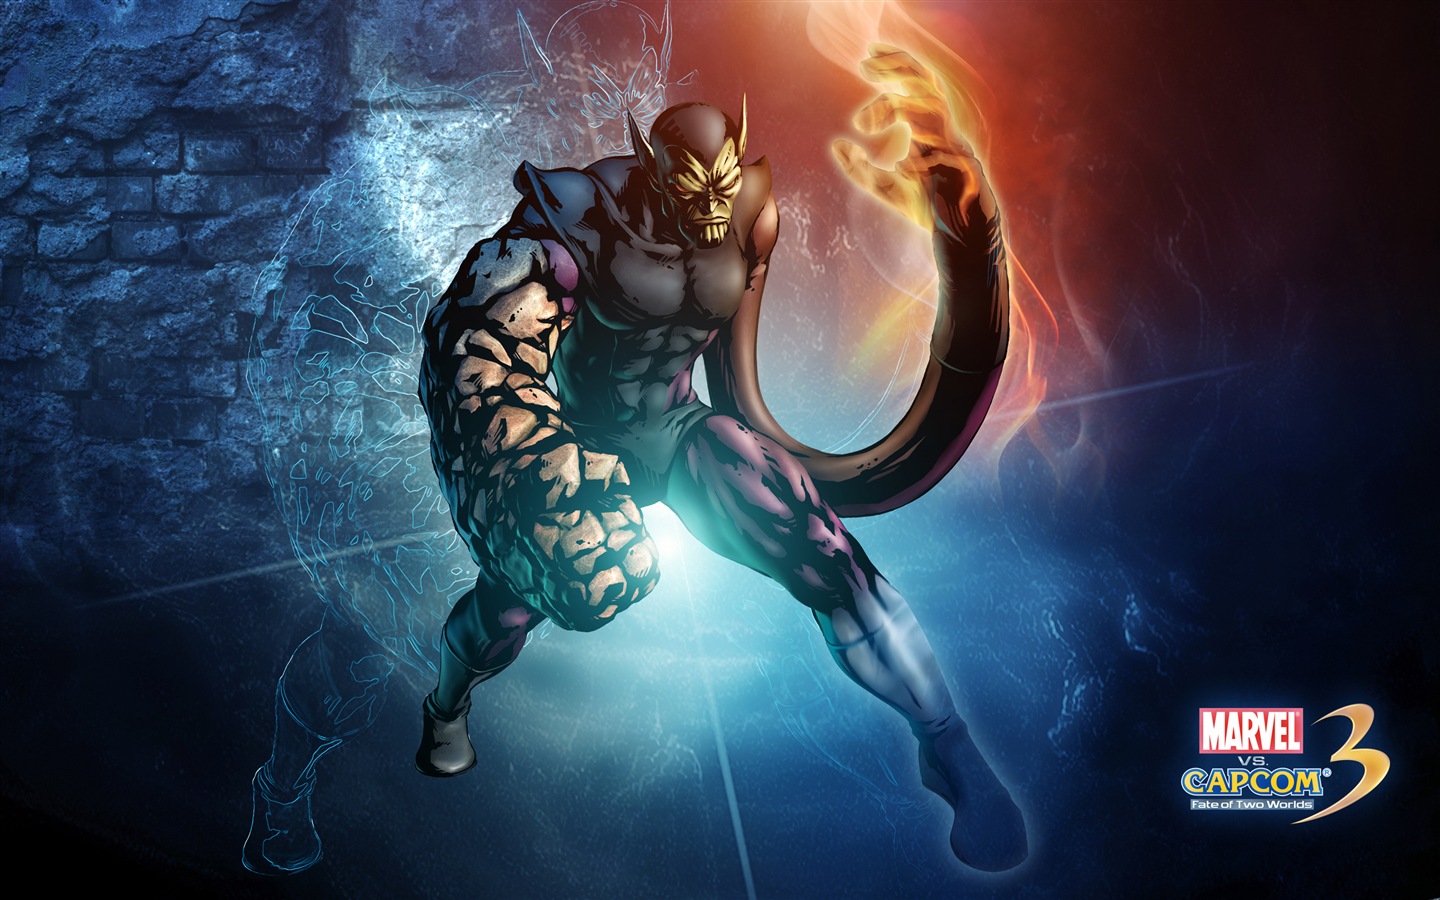 Marvel VS. Capcom 3: Fate of Two Worlds HD game wallpapers #24 - 1440x900